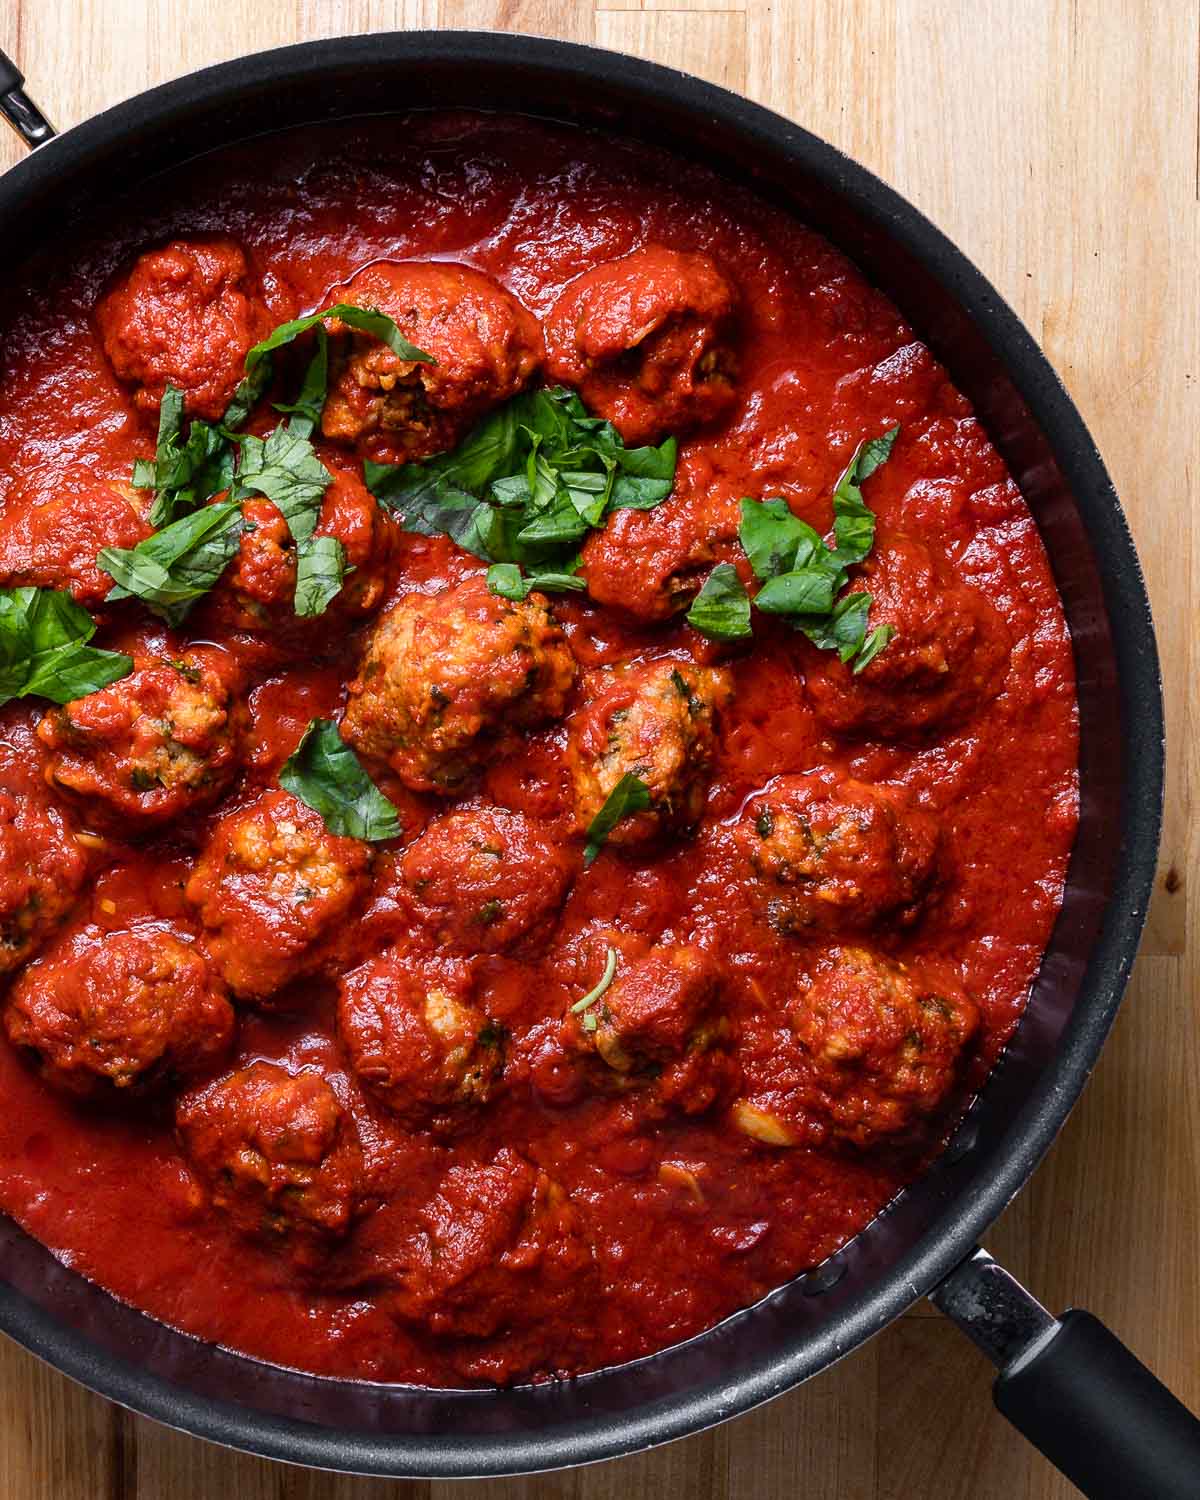 Sausage meatballs in large black pan with tomato sauce.